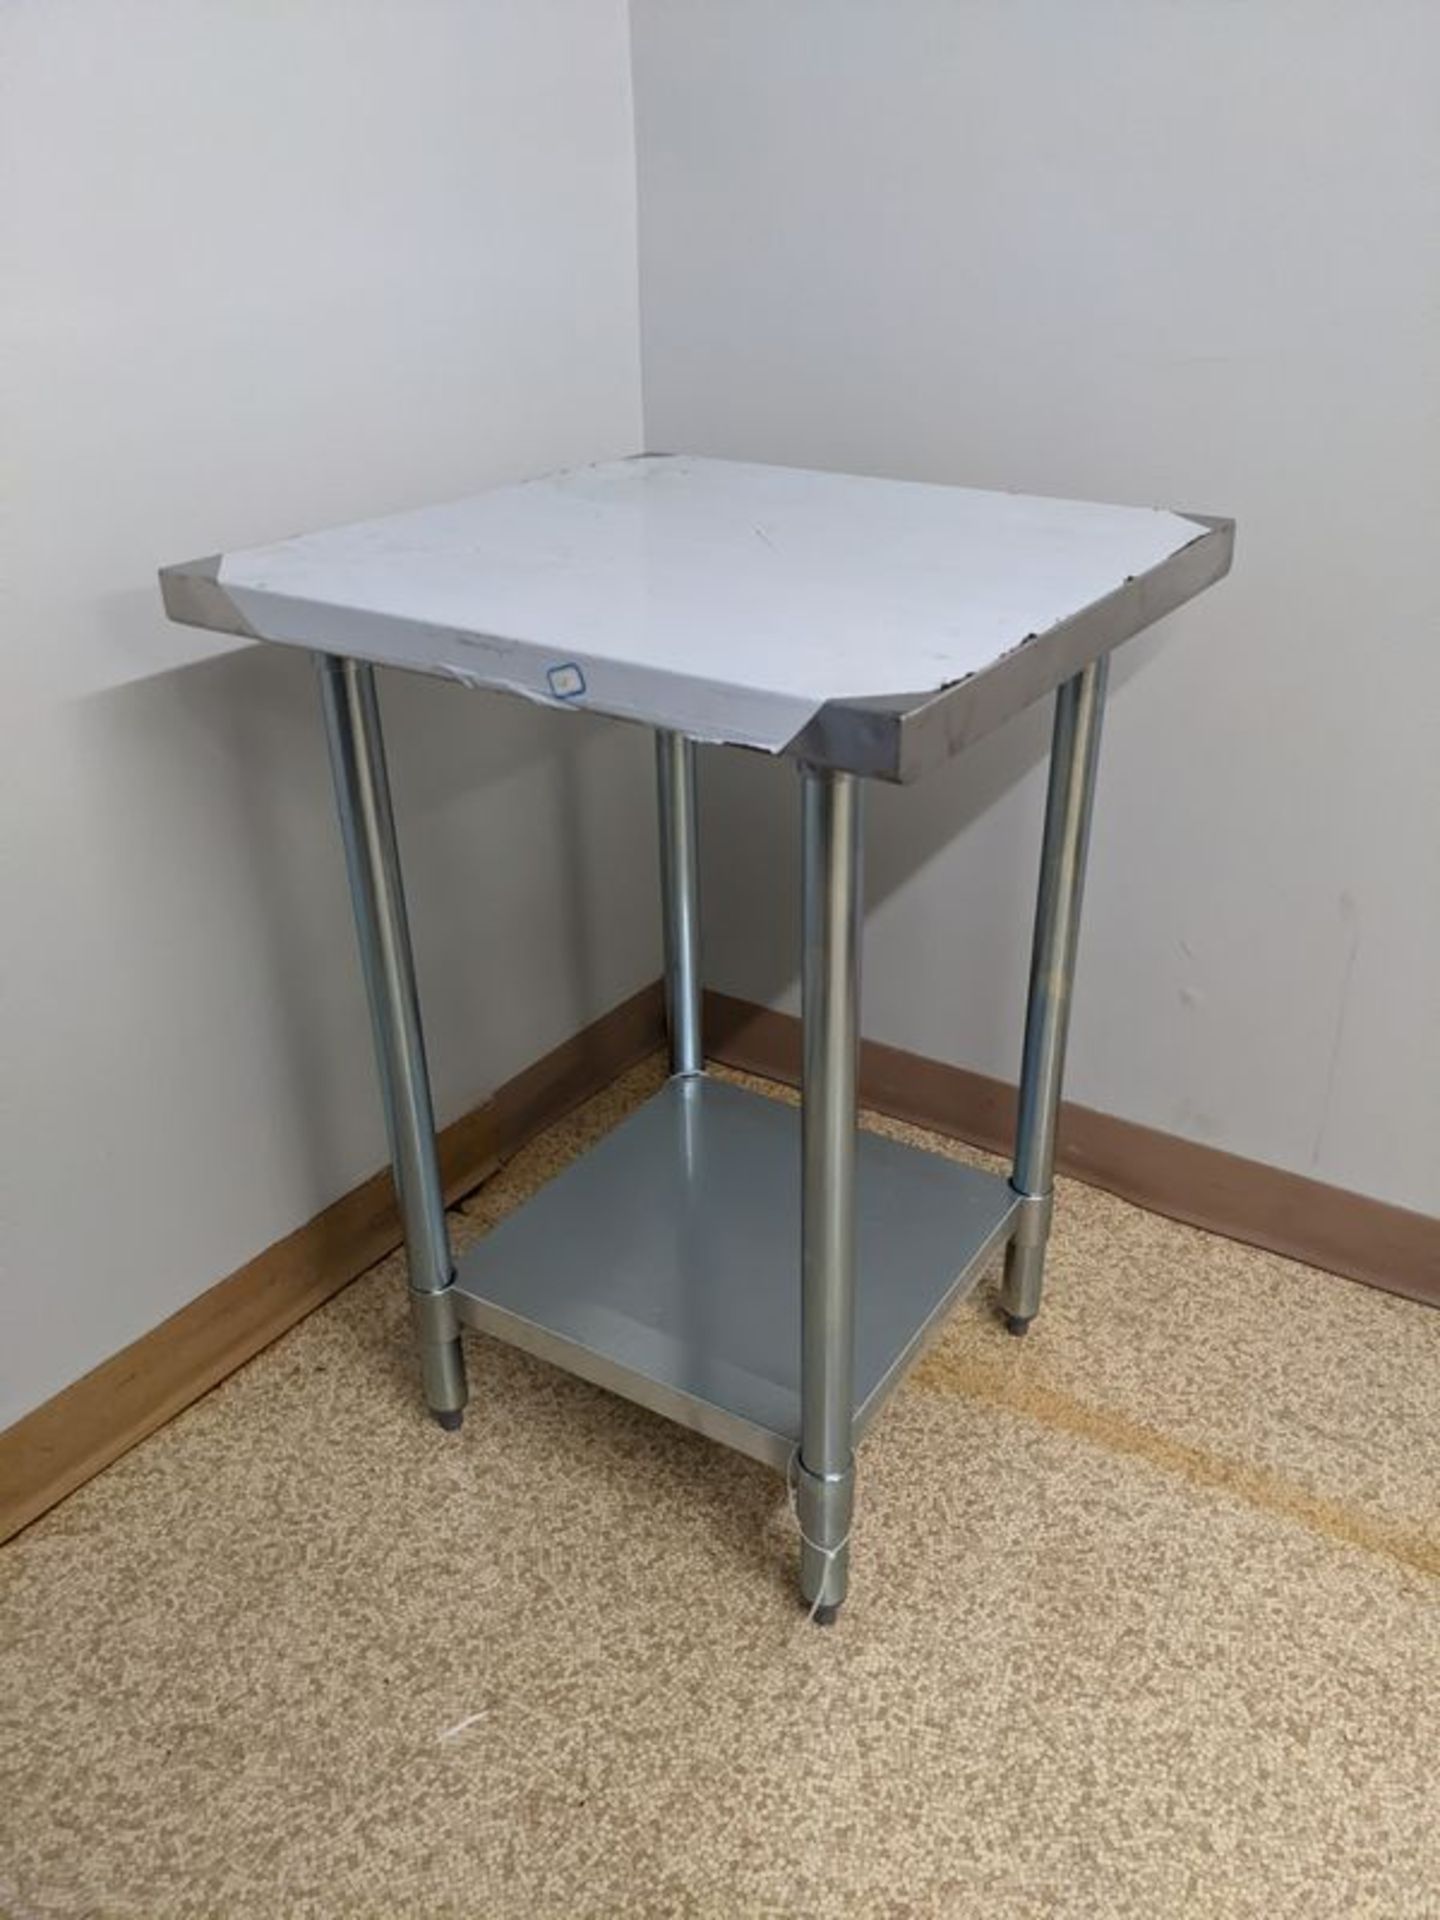 New 24 x 24" Stainless Steel Table